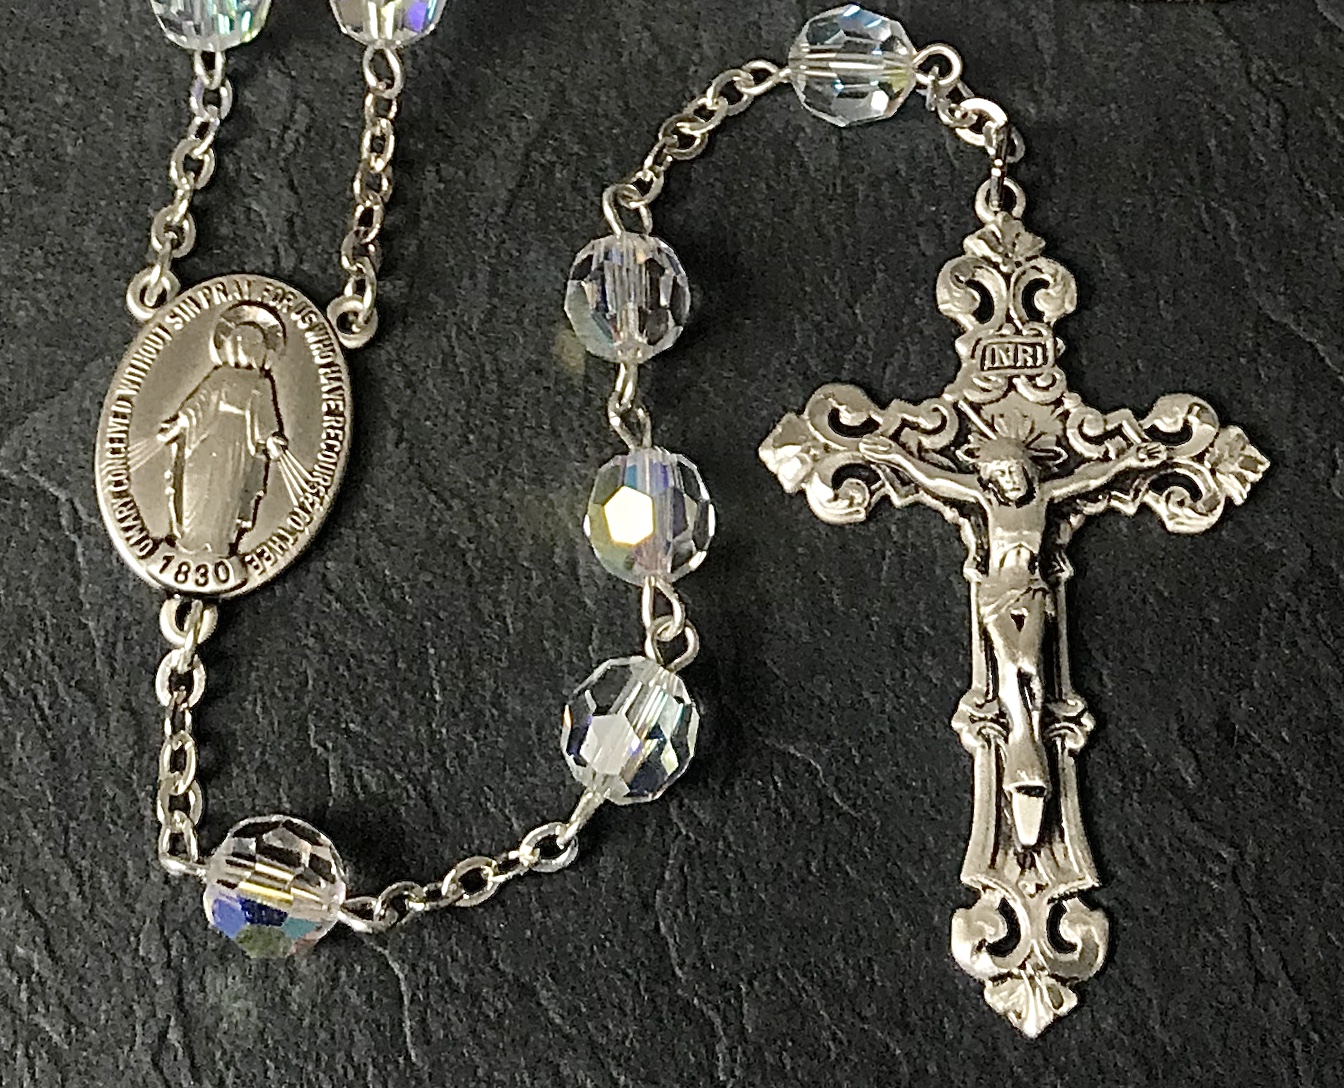 8mm ROUND CRYSTAL AB SWAROVSKI ALL STERLING EXCELSIOR ROSARY WITH STERLING SILVER WIRE, CHAIN, CROSS, & CENTER